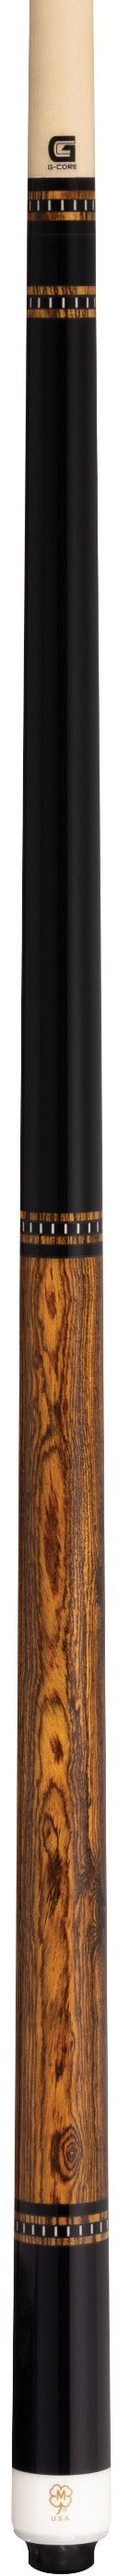 Mcdermott G440C Pool Cue | G-Core - Cue of the Month -McDermott